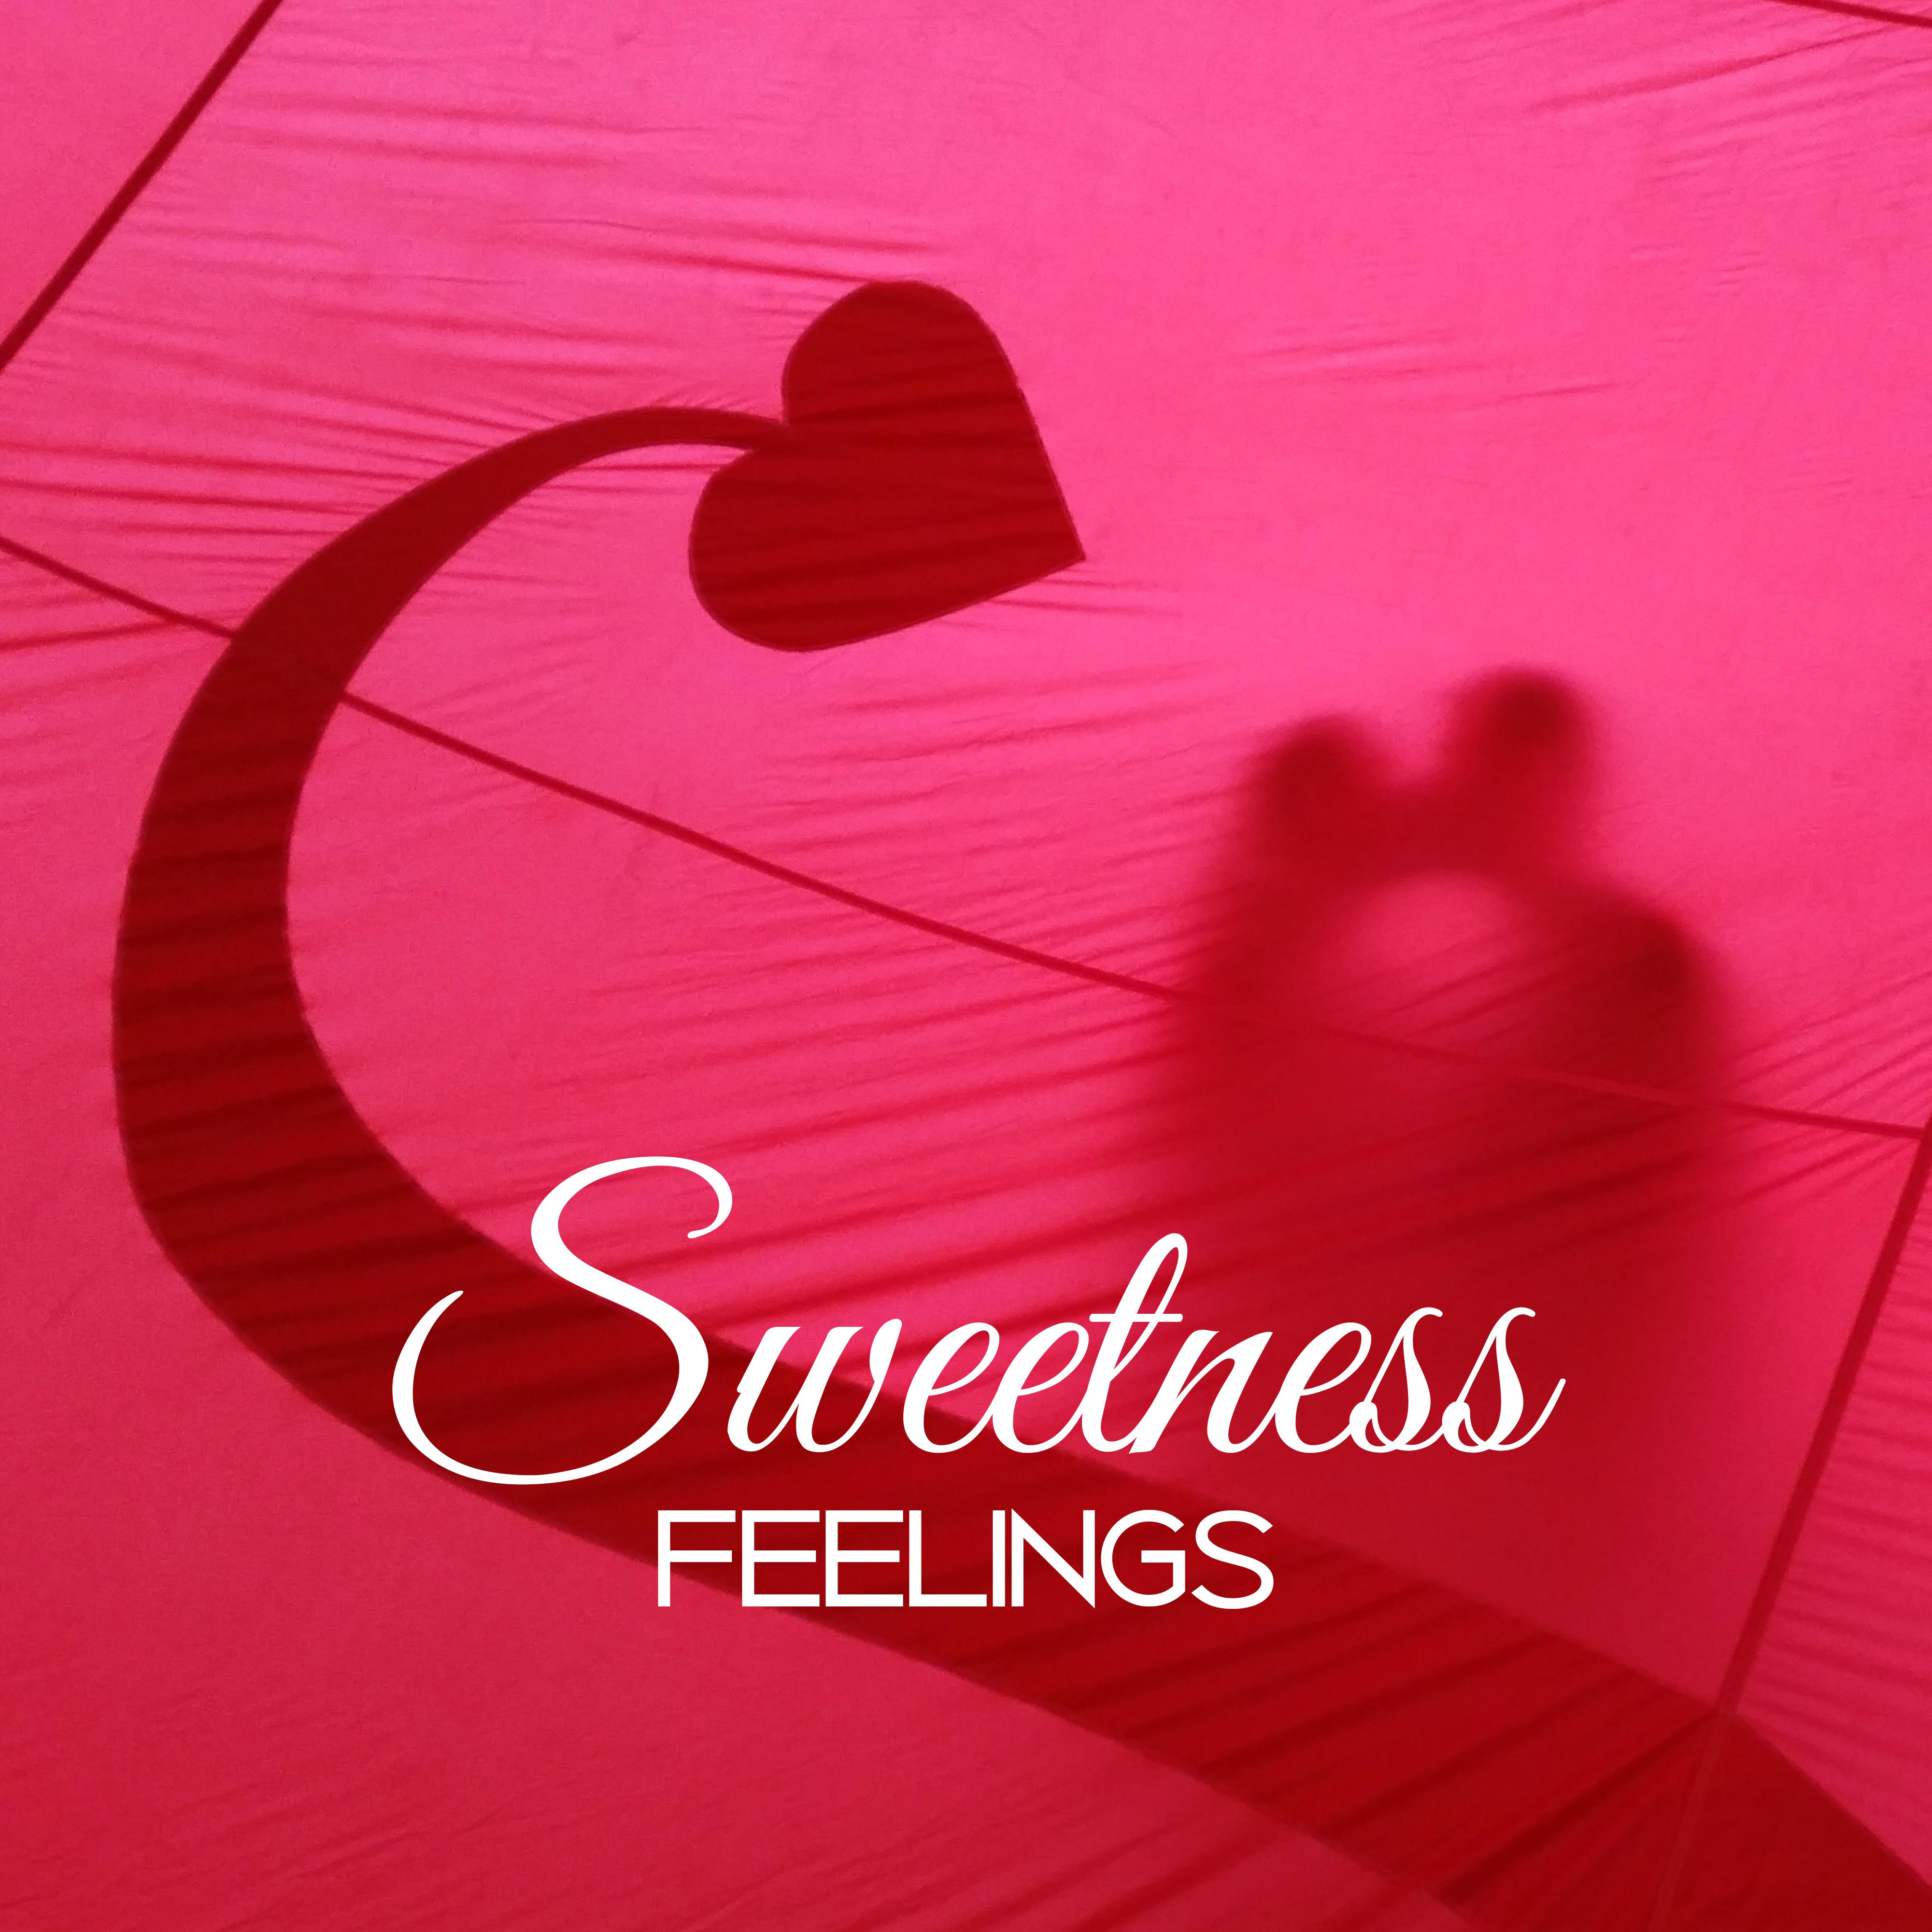 Sweetness Feelings  Jazz for Love, Sensual Music, Romantic Evening,  Piano, Deep Relax for Lovers